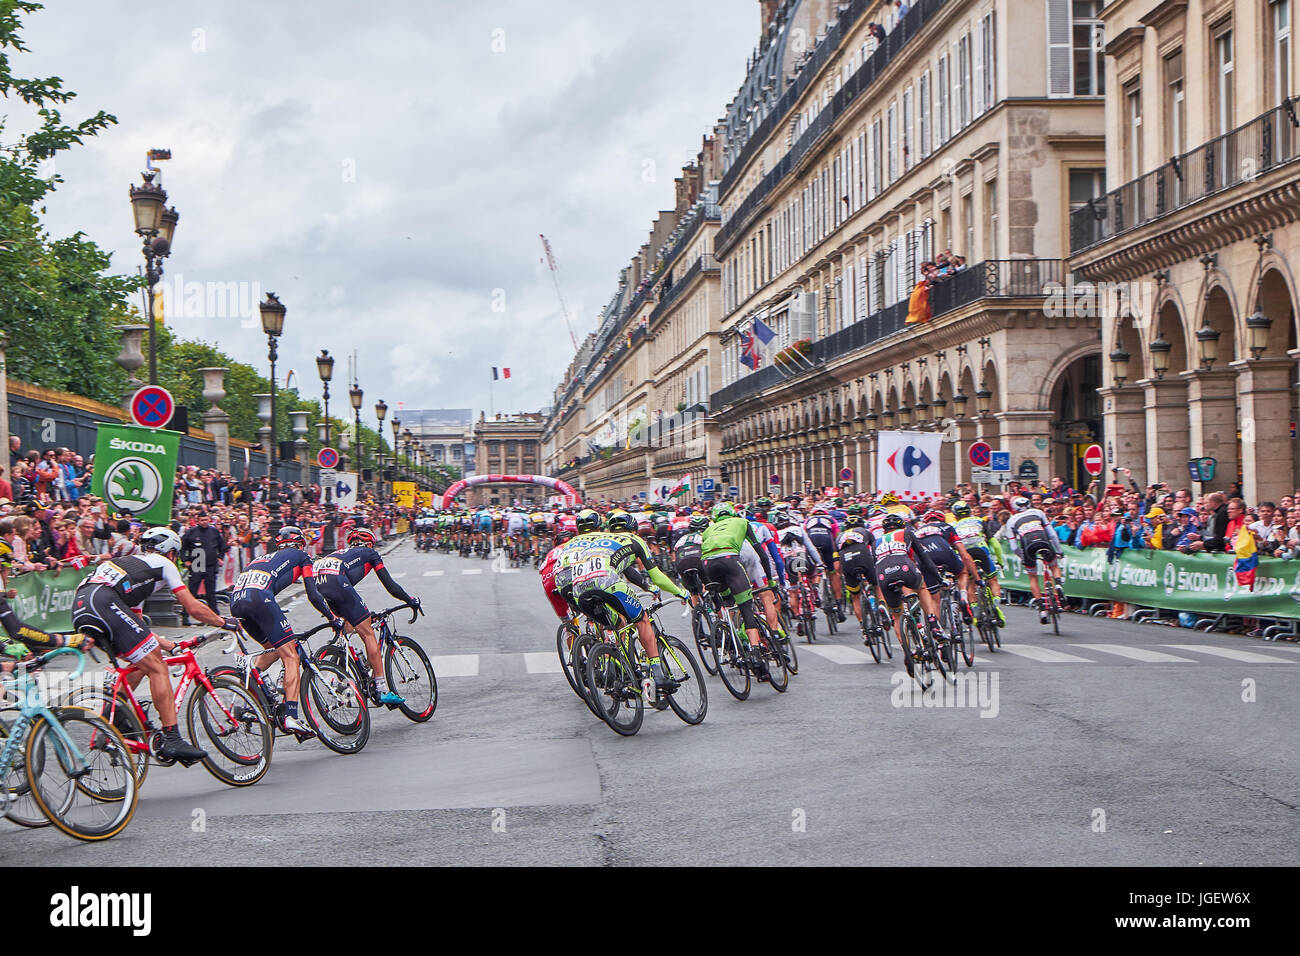 PARIS, FRANCE - JULY 26, 2015: the Tour de France peloton on the final stage on the roads around the tuileries in Paris Stock Photo